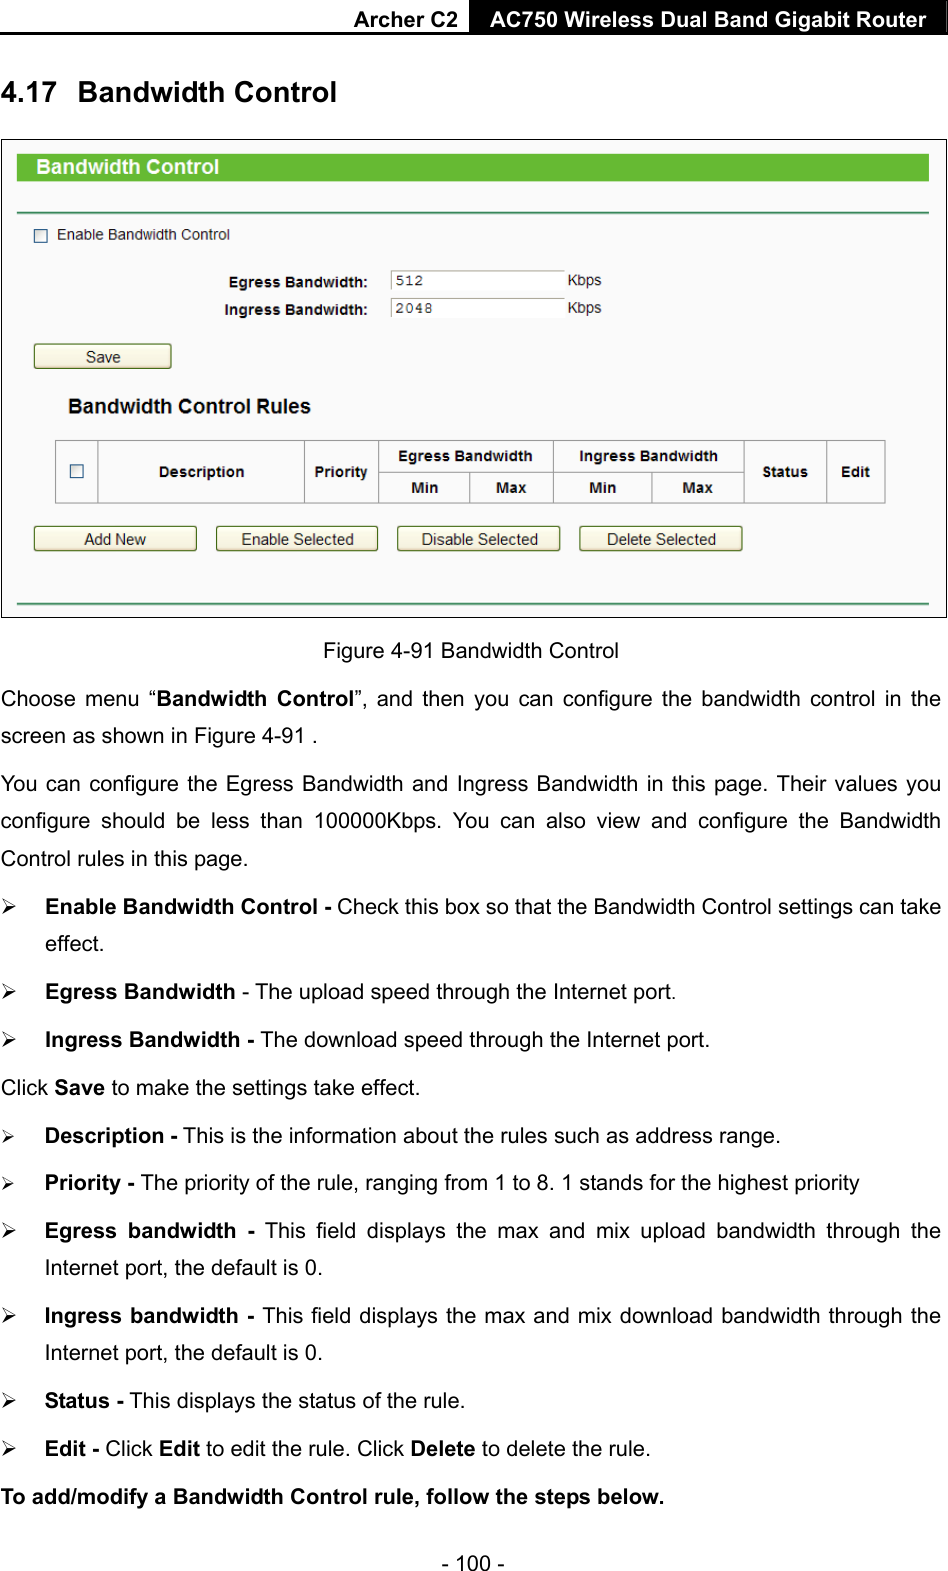 Archer C2 AC750 Wireless Dual Band Gigabit Router  - 100 - 4.17  Bandwidth Control  Figure 4-91 Bandwidth Control   Choose menu “Bandwidth Control”, and then you can configure the bandwidth control in the screen as shown in Figure 4-91 .  You can configure the Egress Bandwidth and Ingress Bandwidth in this page. Their values you configure should be less than 100000Kbps. You can also view and configure the Bandwidth Control rules in this page.  Enable Bandwidth Control - Check this box so that the Bandwidth Control settings can take effect.  Egress Bandwidth - The upload speed through the Internet port.  Ingress Bandwidth - The download speed through the Internet port. Click Save to make the settings take effect.  Description - This is the information about the rules such as address range.  Priority - The priority of the rule, ranging from 1 to 8. 1 stands for the highest priority  Egress bandwidth - This field displays the max and mix upload bandwidth through the Internet port, the default is 0.  Ingress bandwidth - This field displays the max and mix download bandwidth through the Internet port, the default is 0.  Status - This displays the status of the rule.  Edit - Click Edit to edit the rule. Click Delete to delete the rule. To add/modify a Bandwidth Control rule, follow the steps below. 